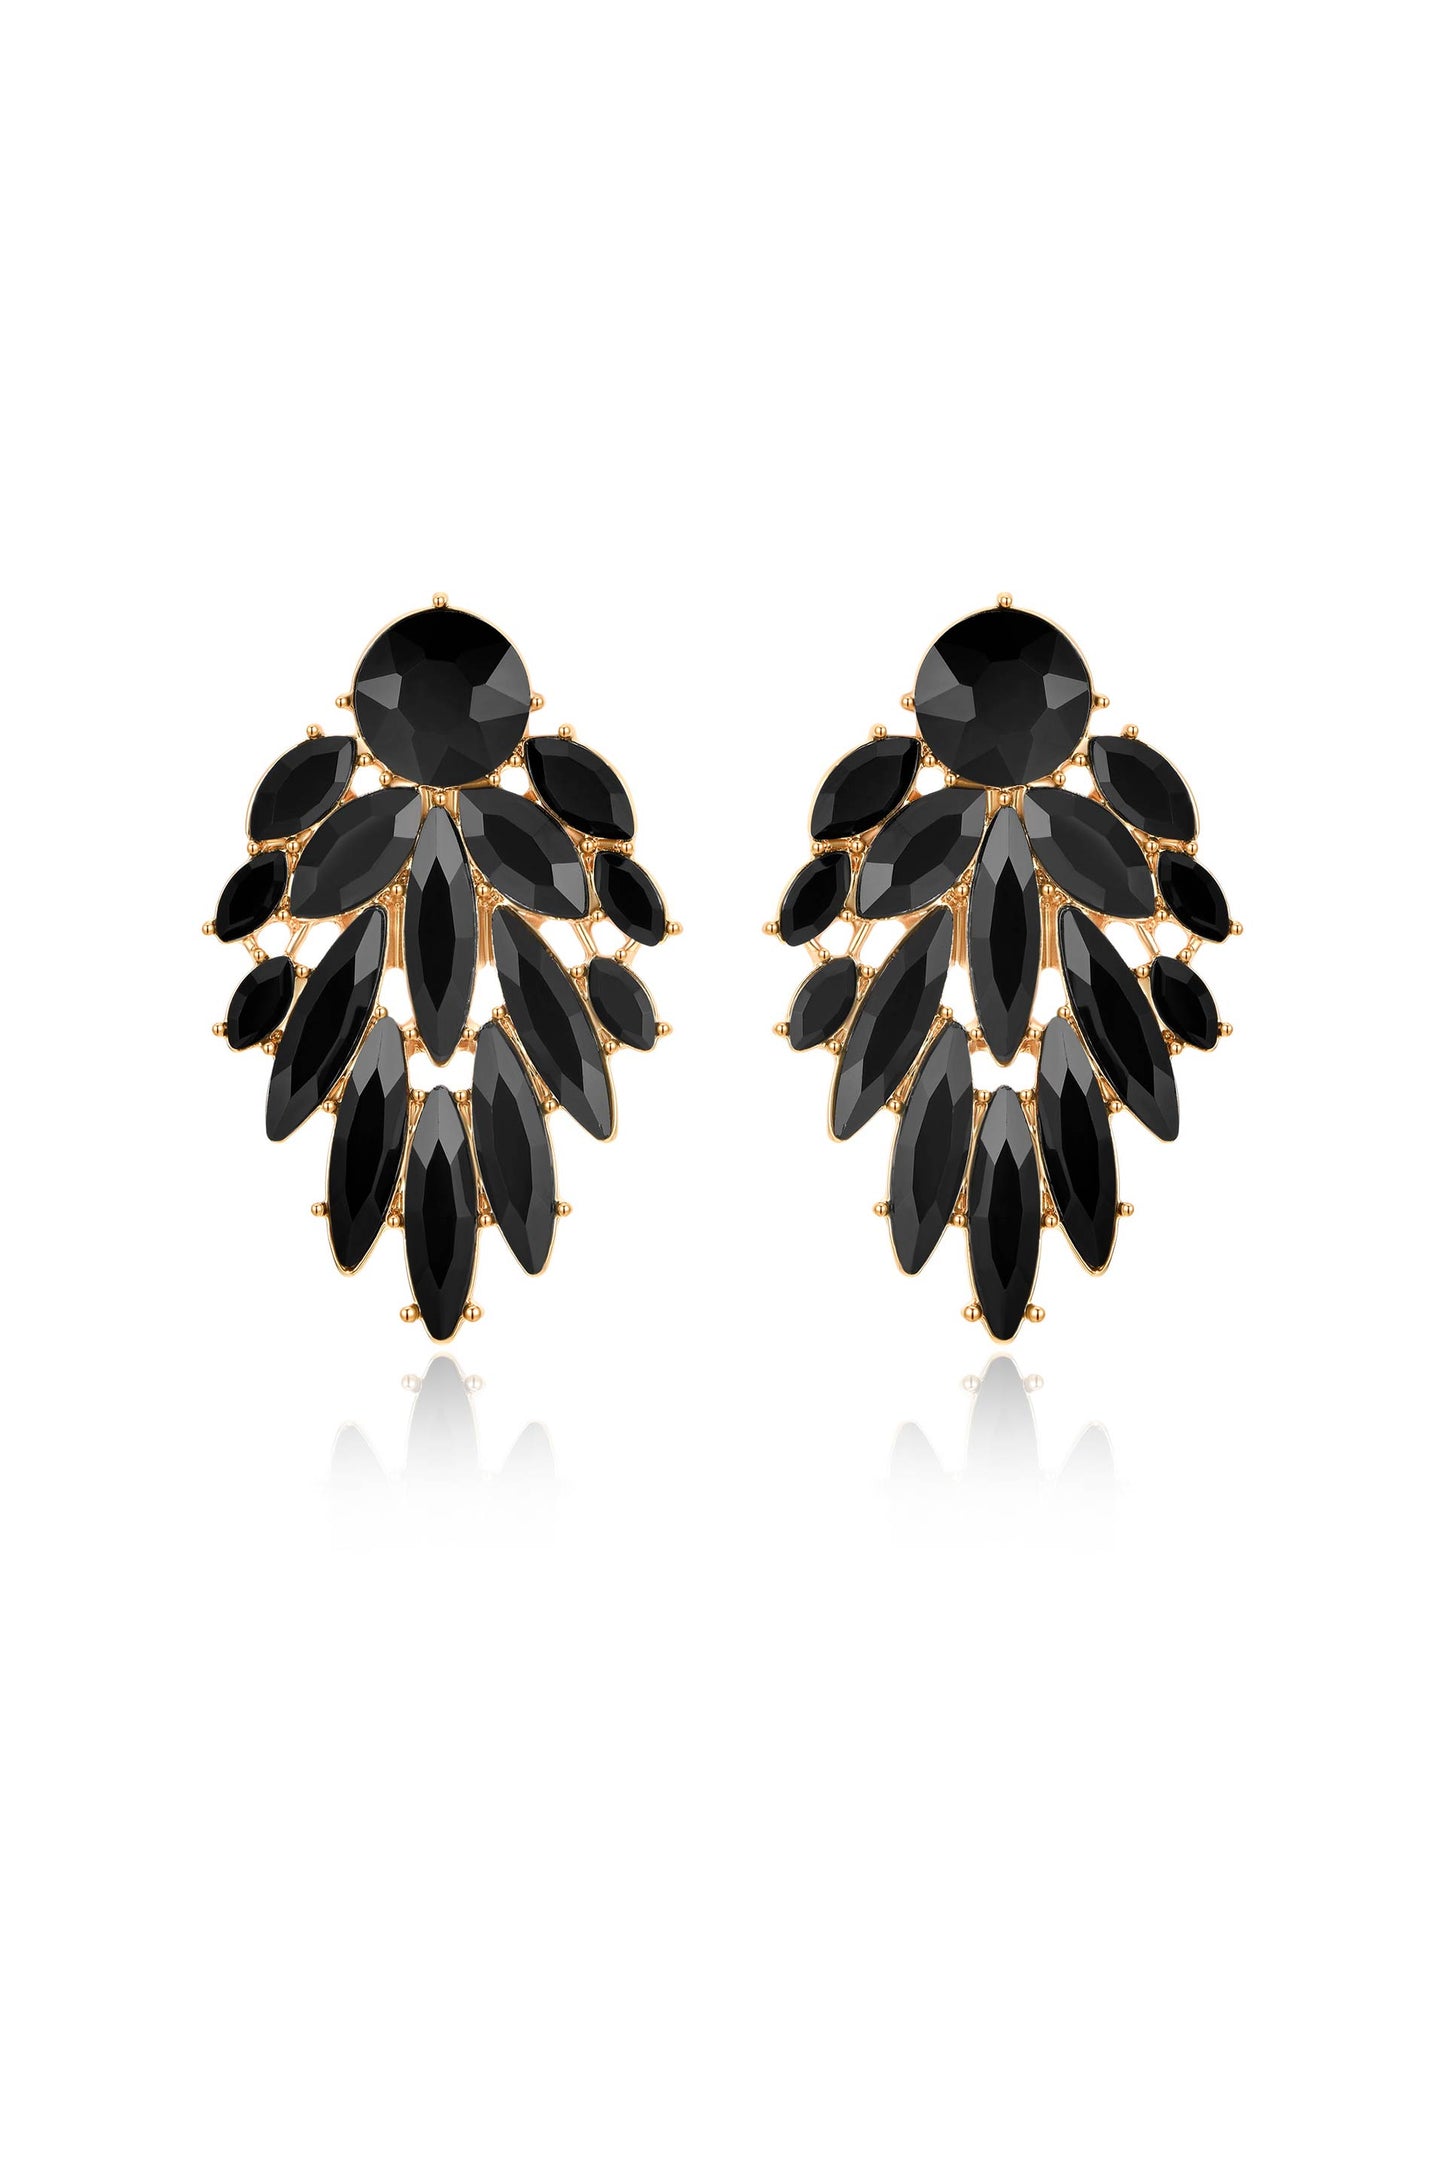 Cry Me A River Earrings in black